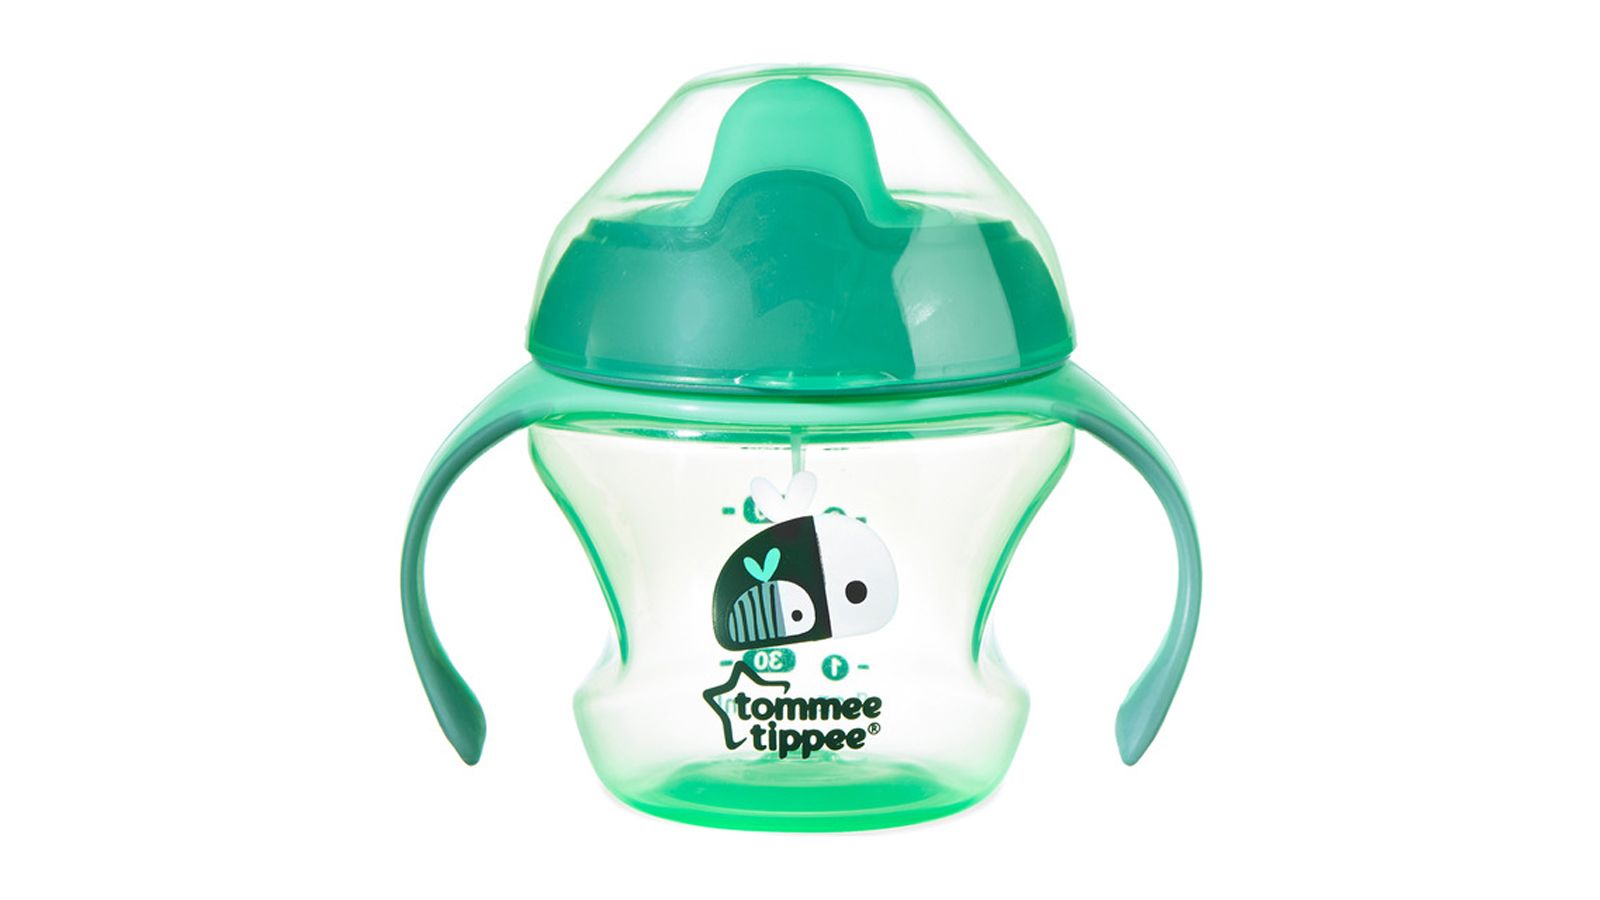 Tommee Tippee Sippy manufacturer recalls 3m children cups over mould risk, The Independent